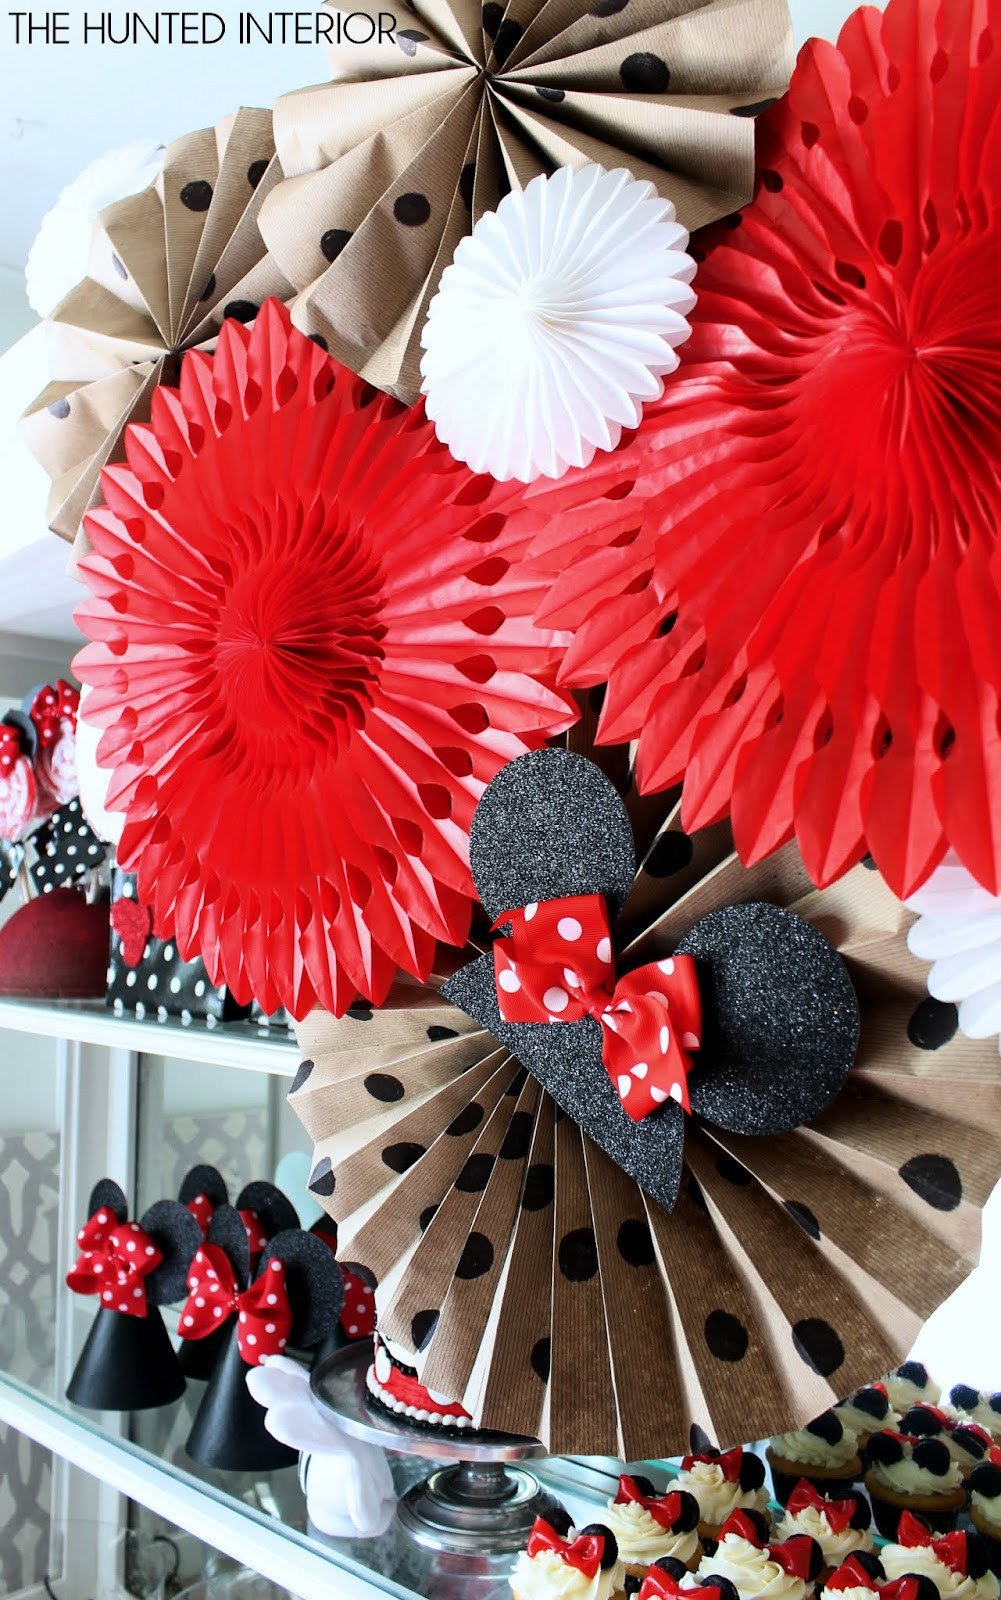 Minnie Mouse Birthday Party Decorations
 hunted interior Minnie Mouse Birthday Party